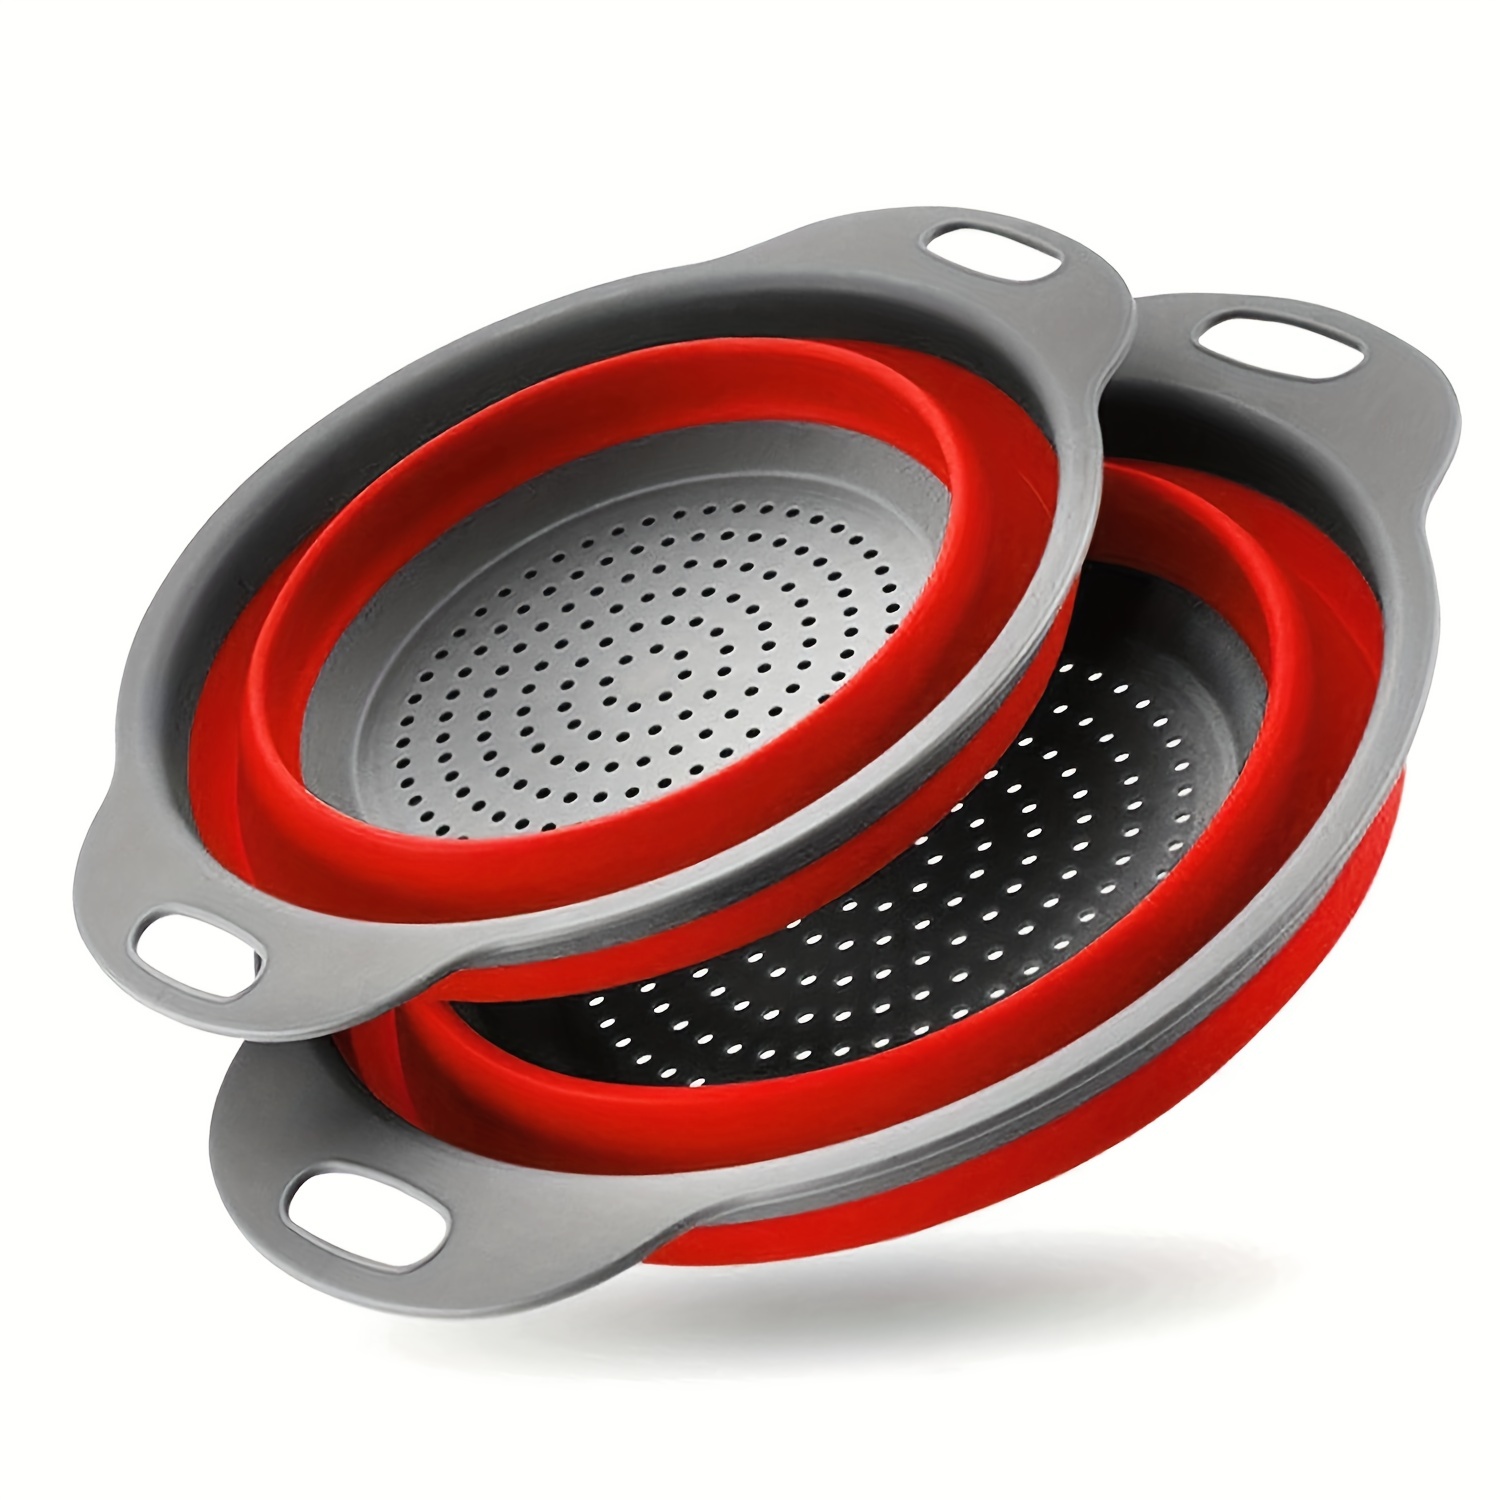  OXO Good Grips Silicone Sink Strainer, Set of 2 : Tools & Home  Improvement